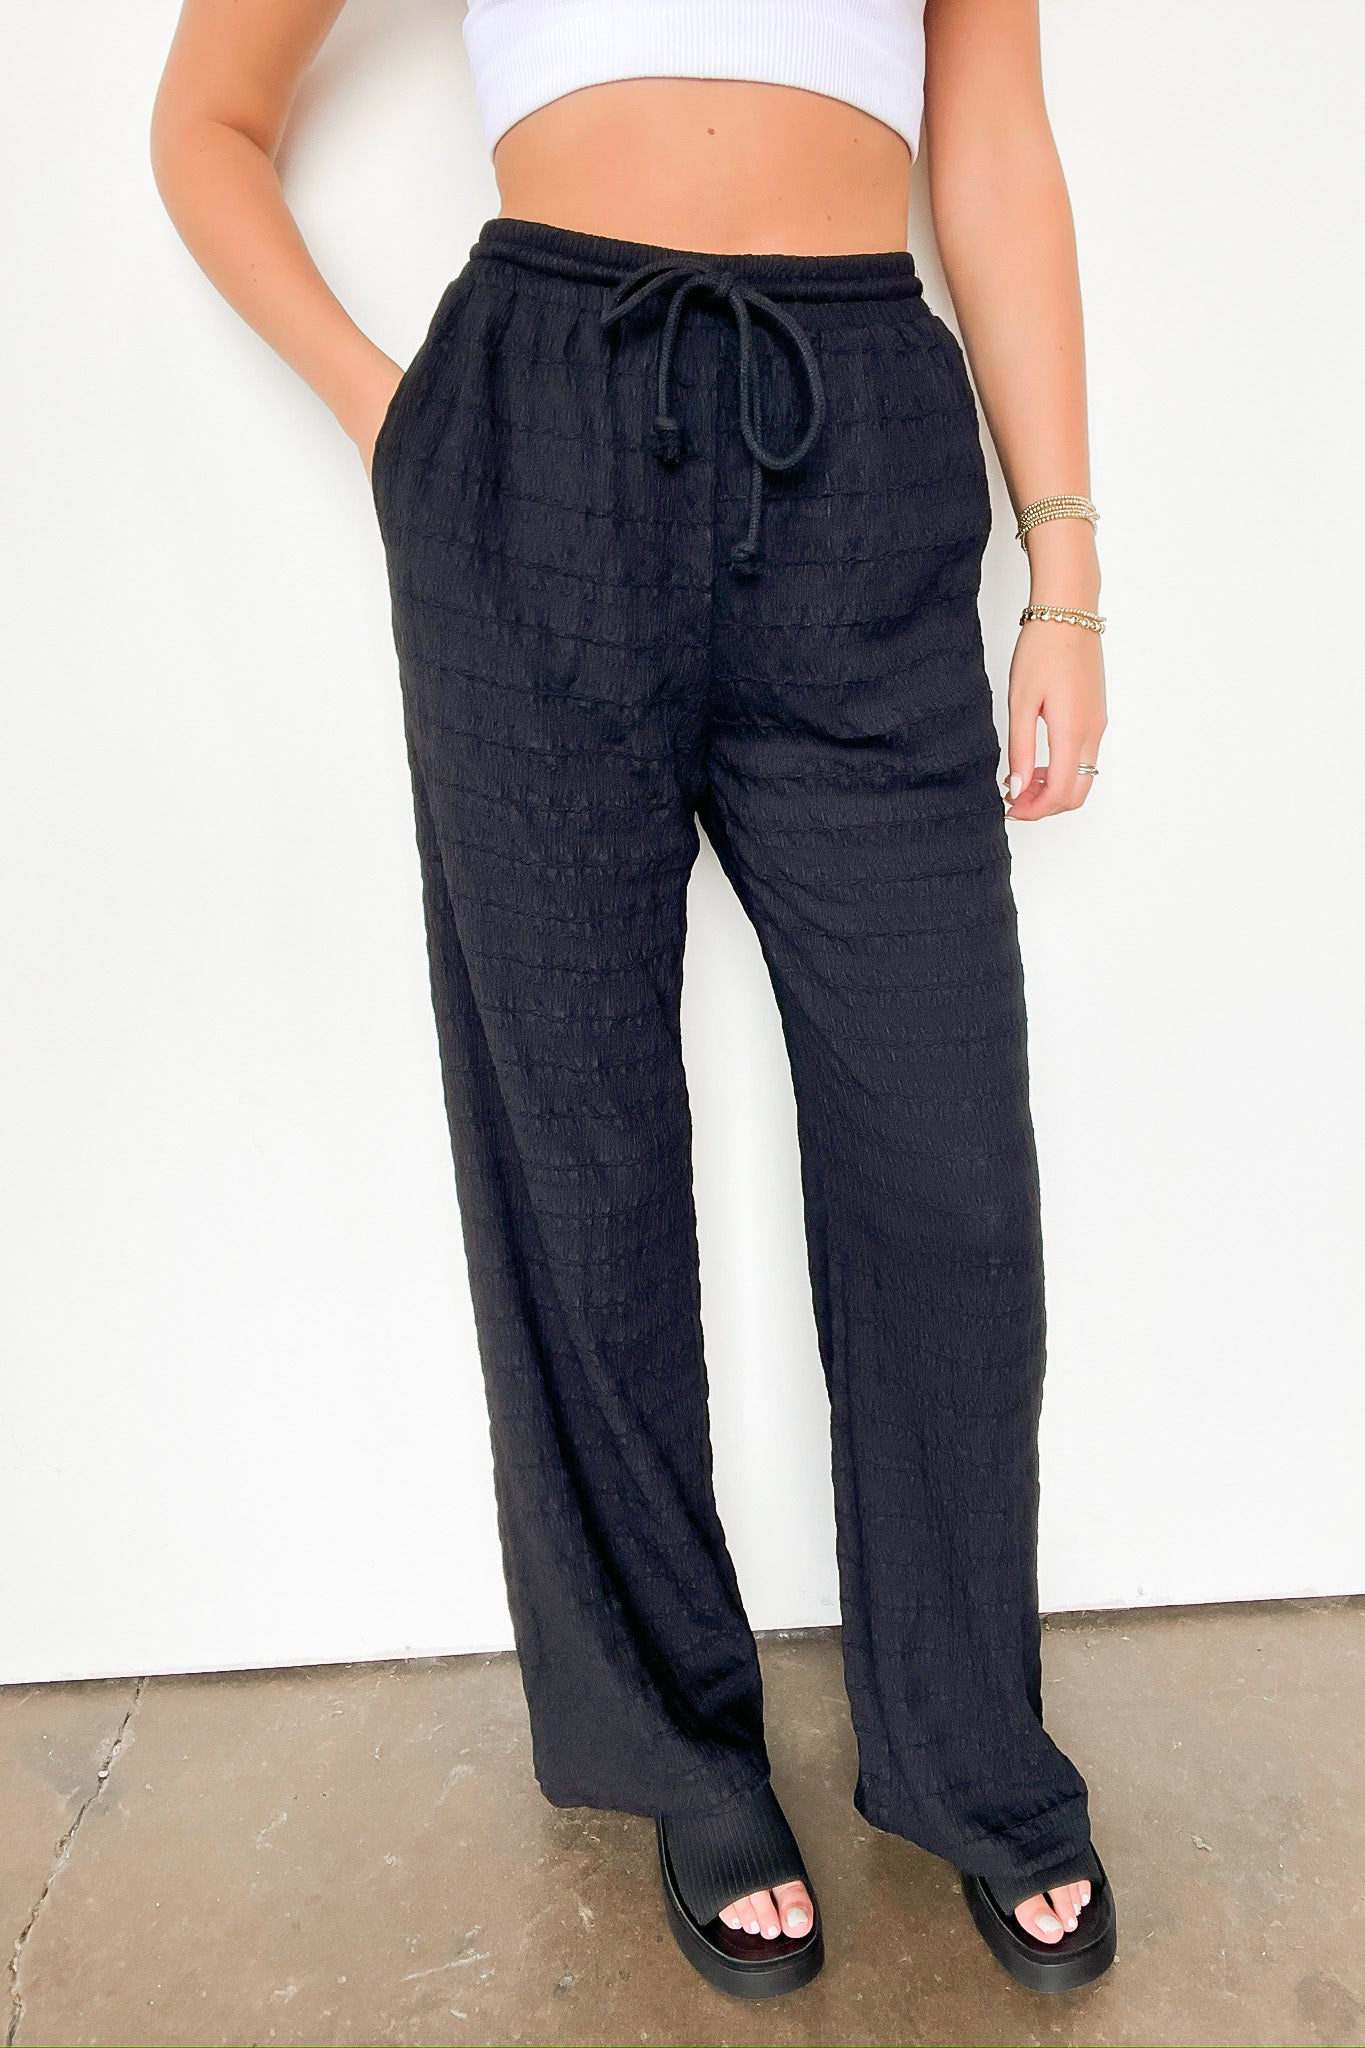 S / Black Delightful Approach High Waist Textured Knit Pants - Madison and Mallory